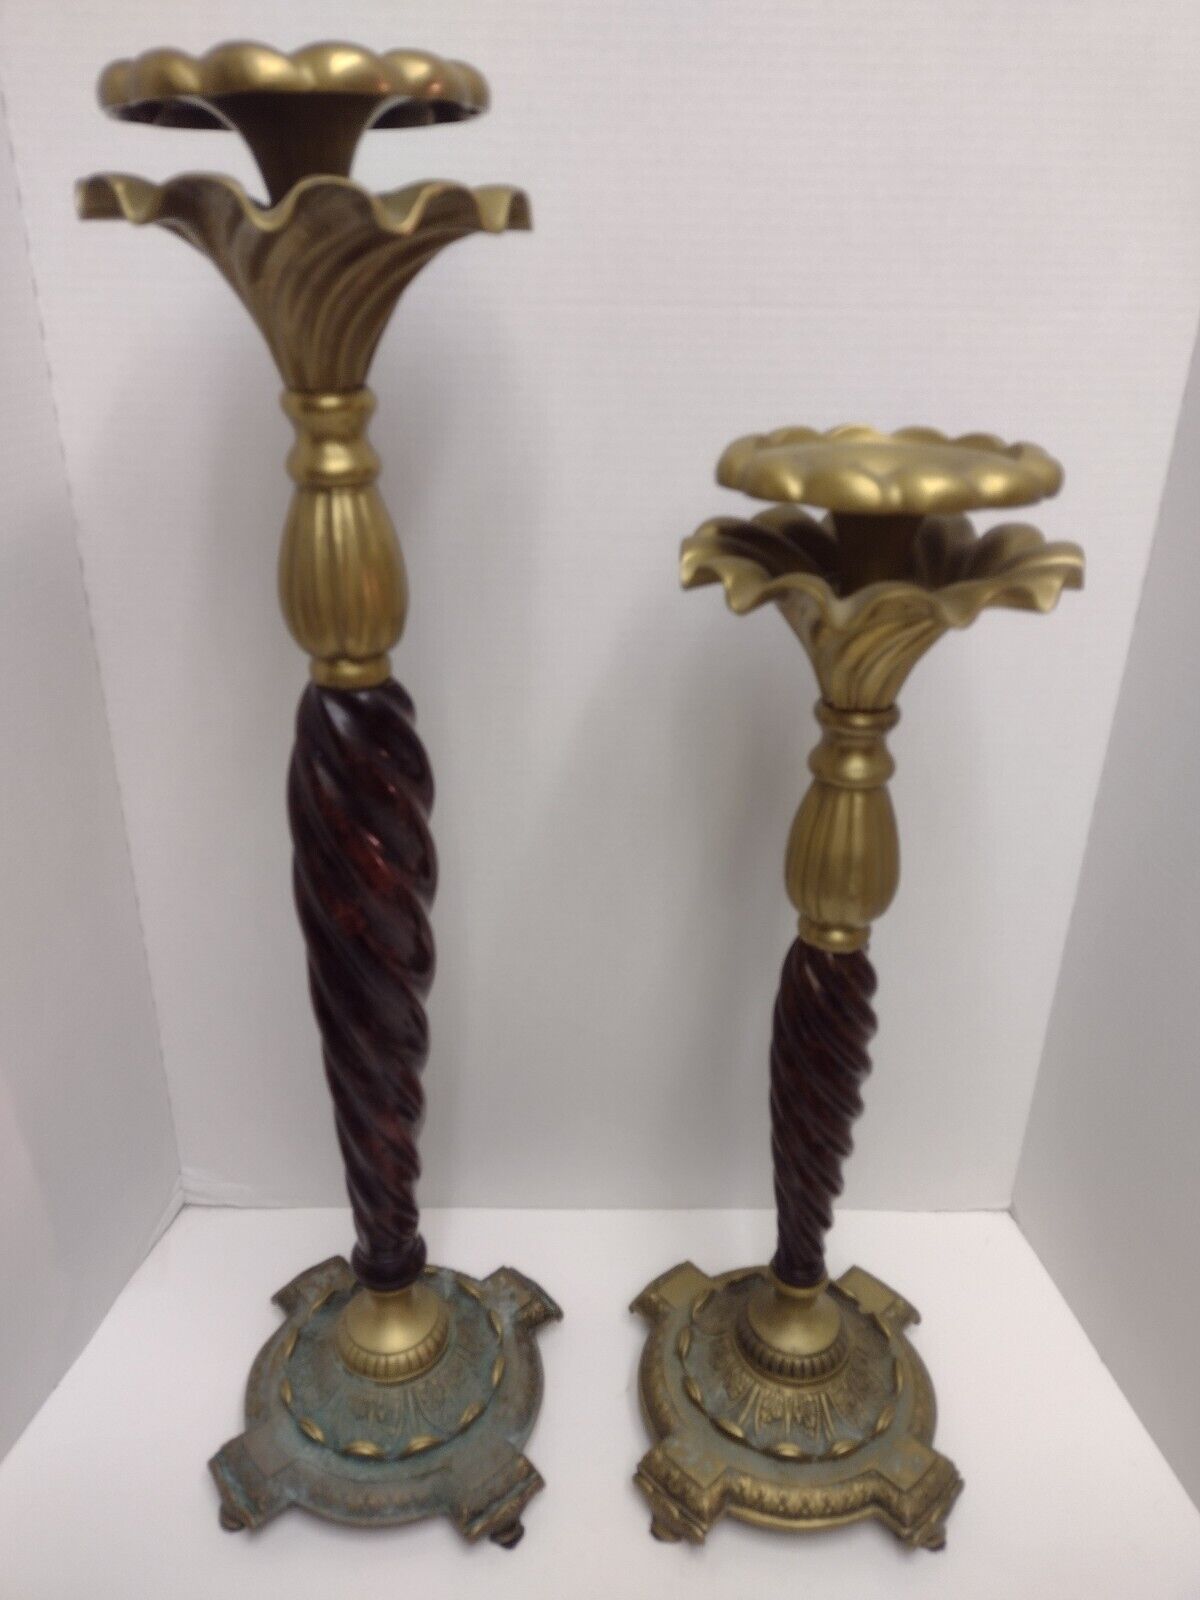  Decorative Brass Candle Holders Polished Wooden Spiral Twist Ruffle Pair Mcm 